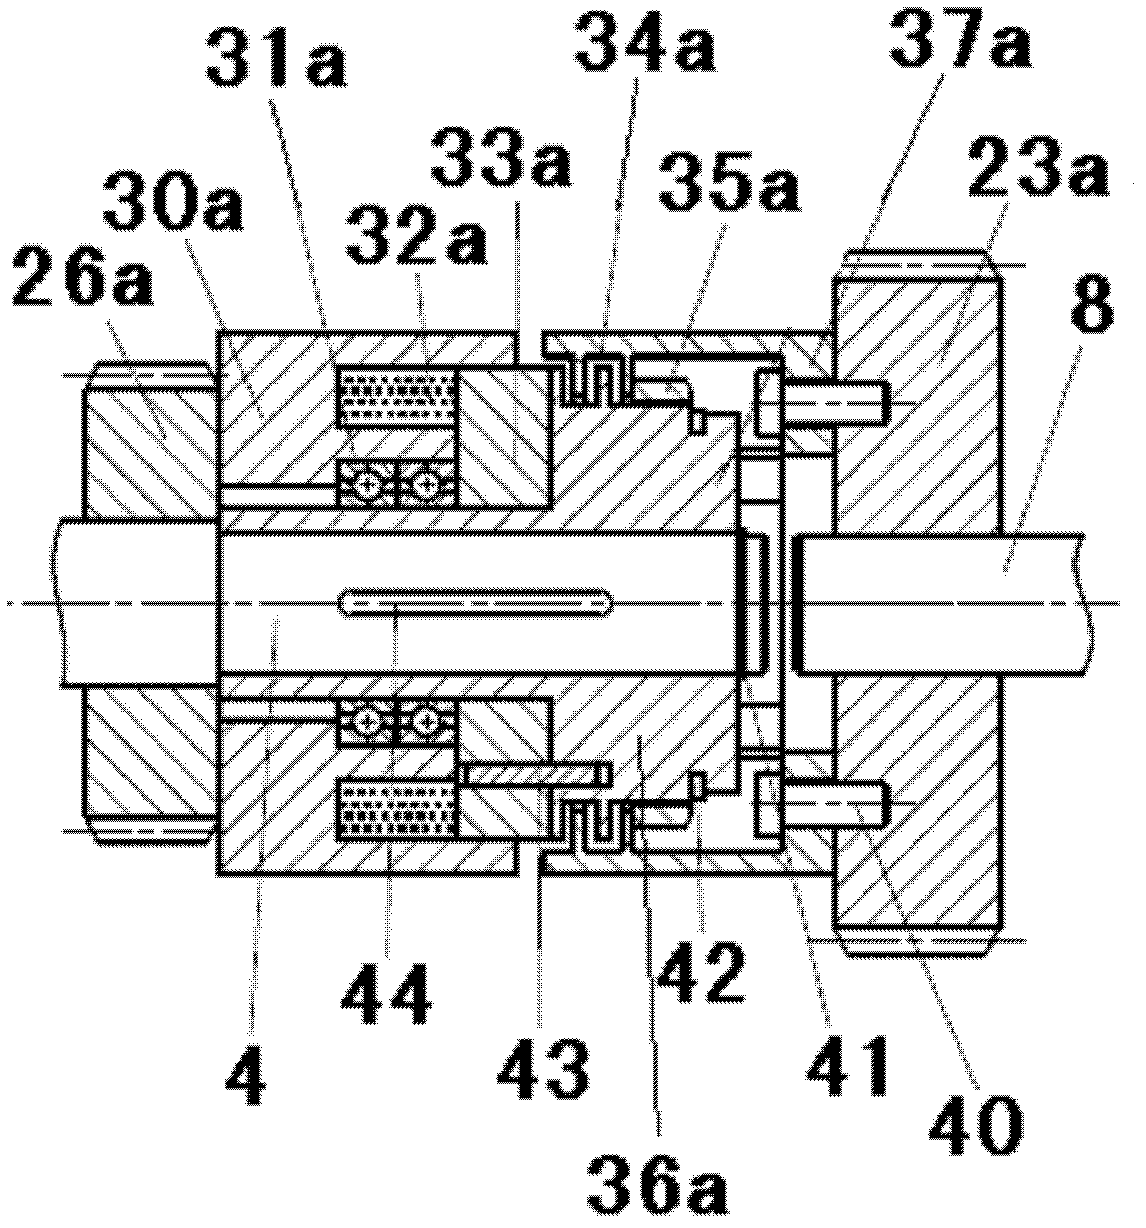 Novel mechanical supercharger structure and electromagnetic clutch mechanism applied to same